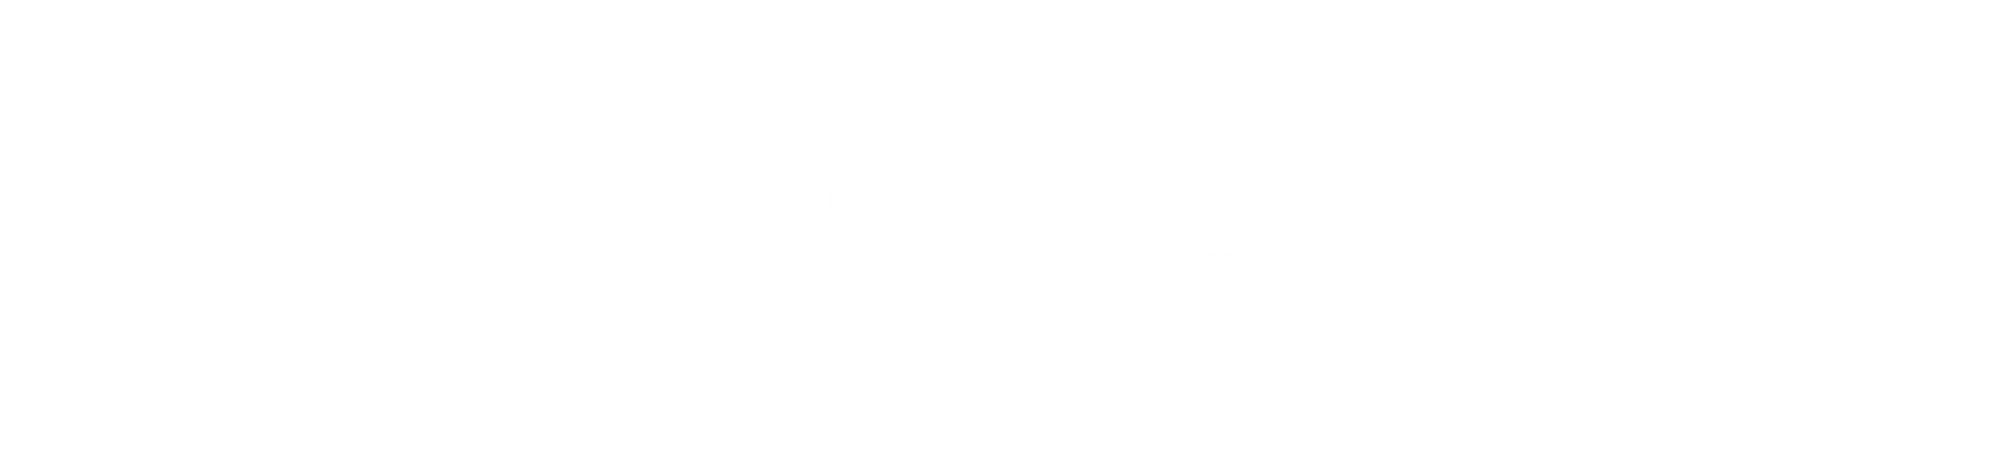 Black background with a complex mathematical equation involving numbered variables, 'W' coefficients, and biases indicating precision